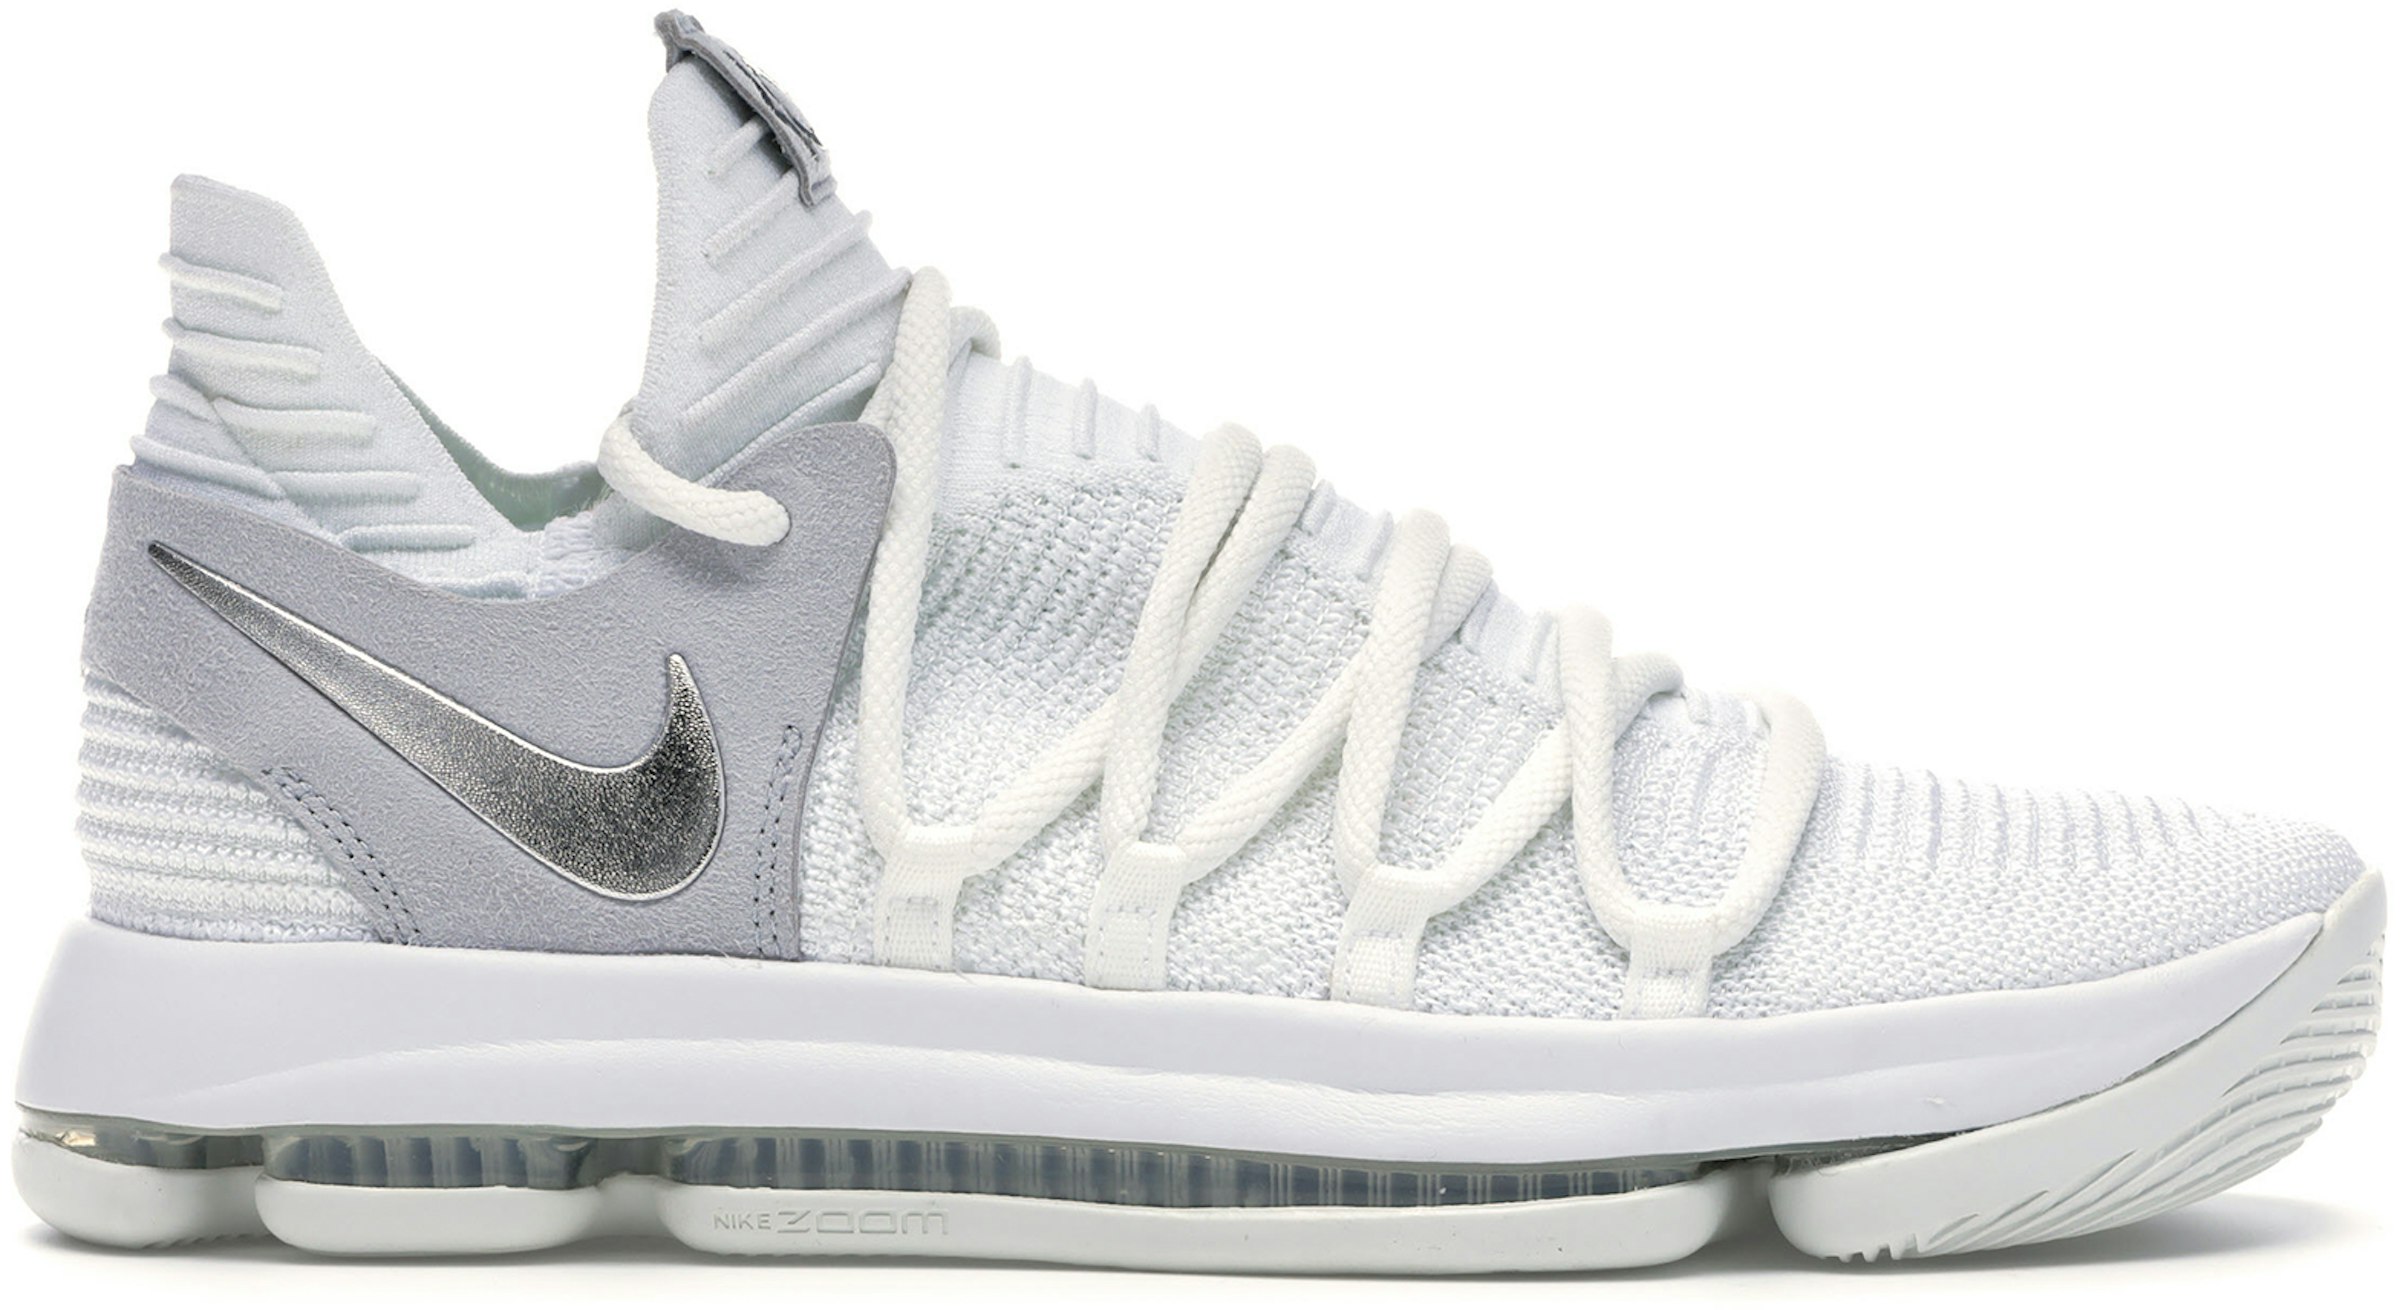 Buy Nike KD 10 Shoes & New Sneakers -